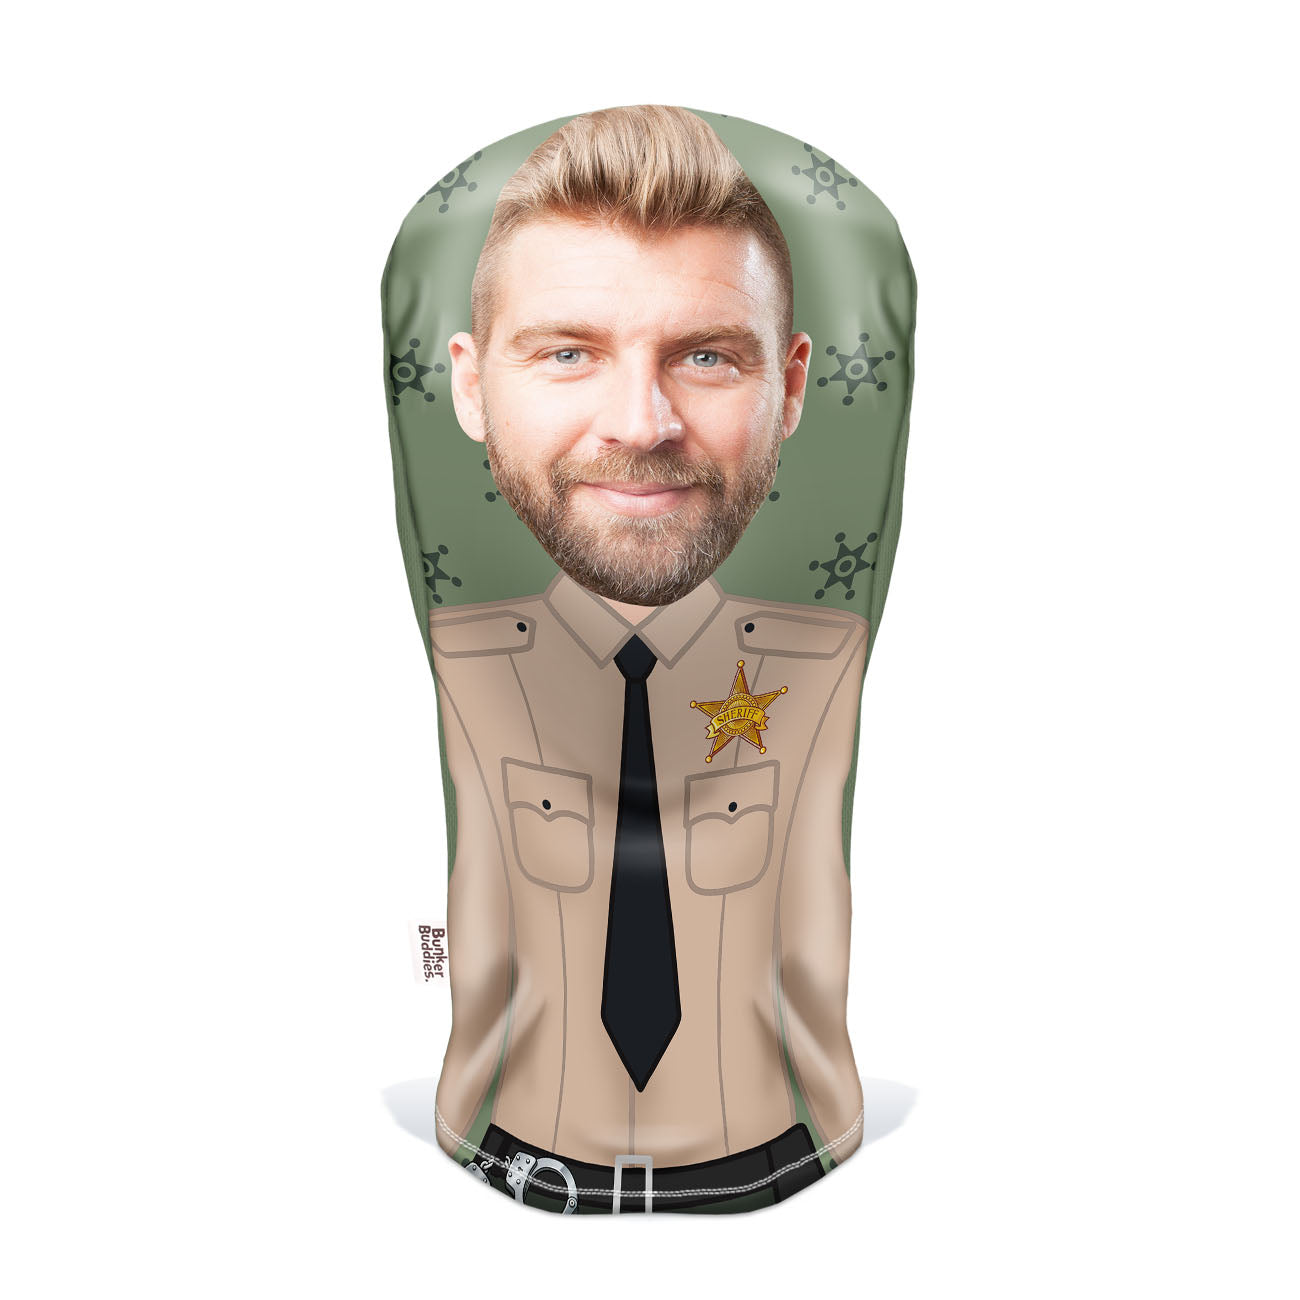 Sheriff Personalised Golf Head Cover